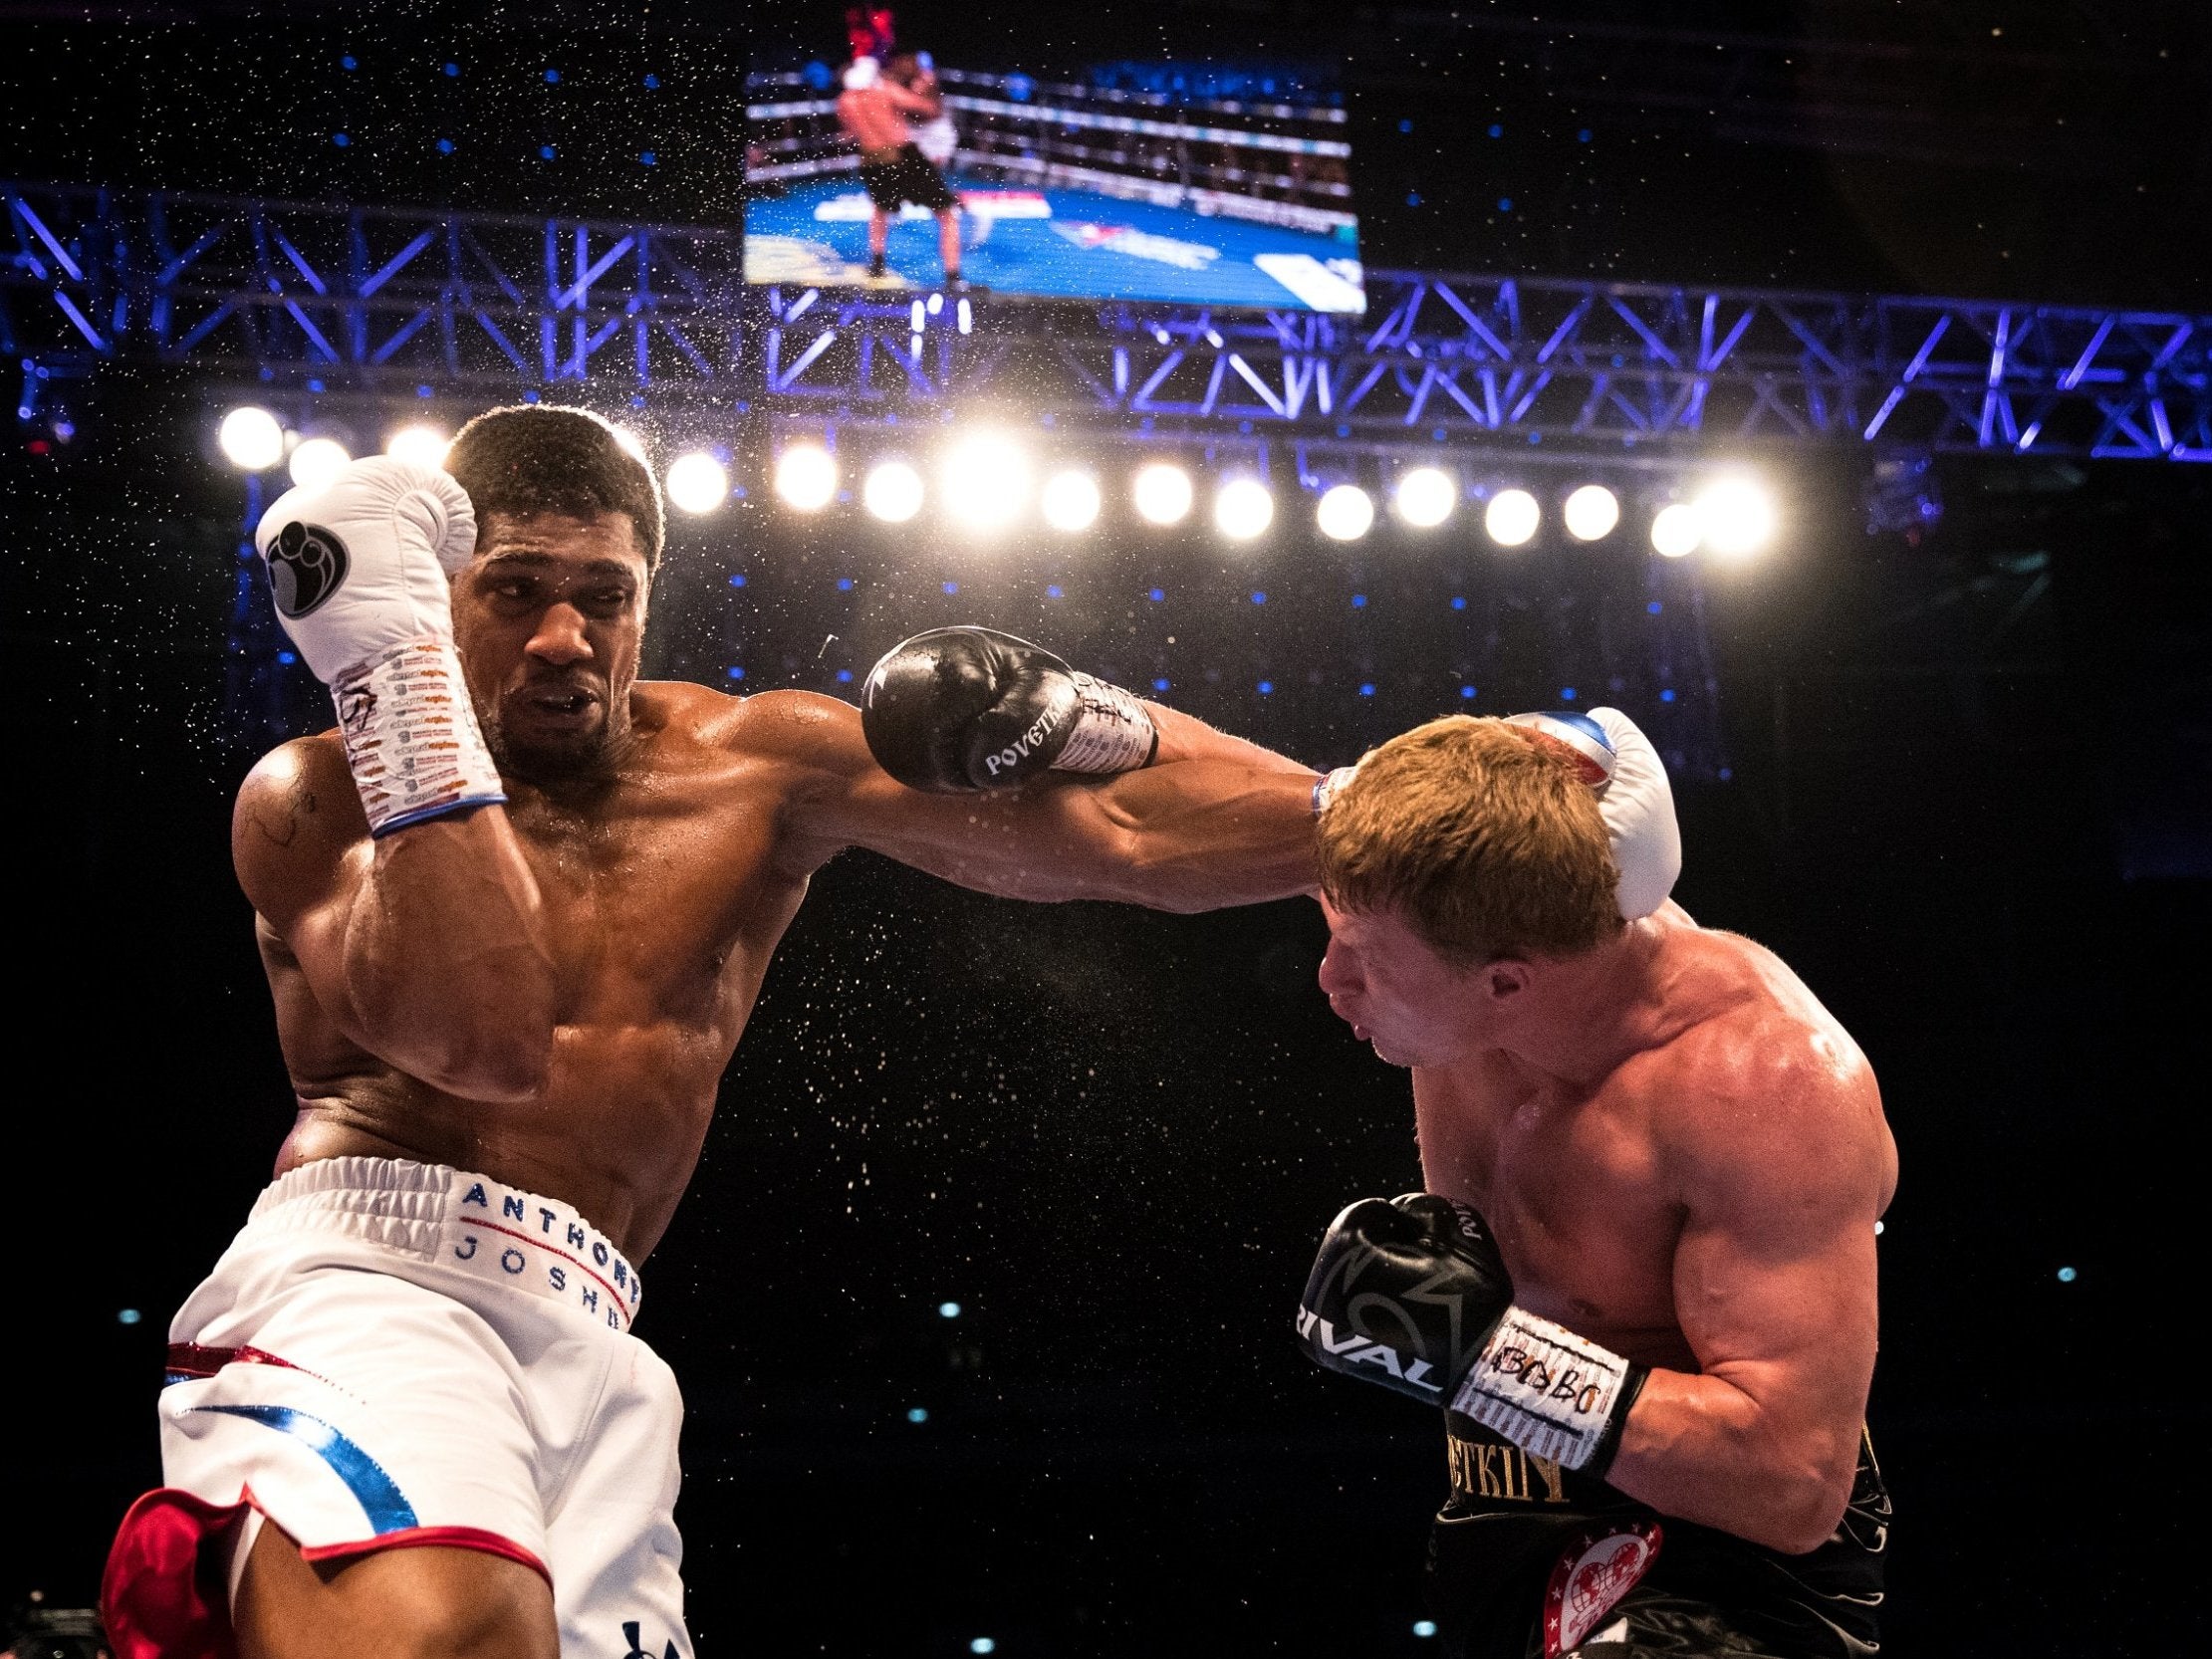 Joshua defended his titles against Povetkin last month